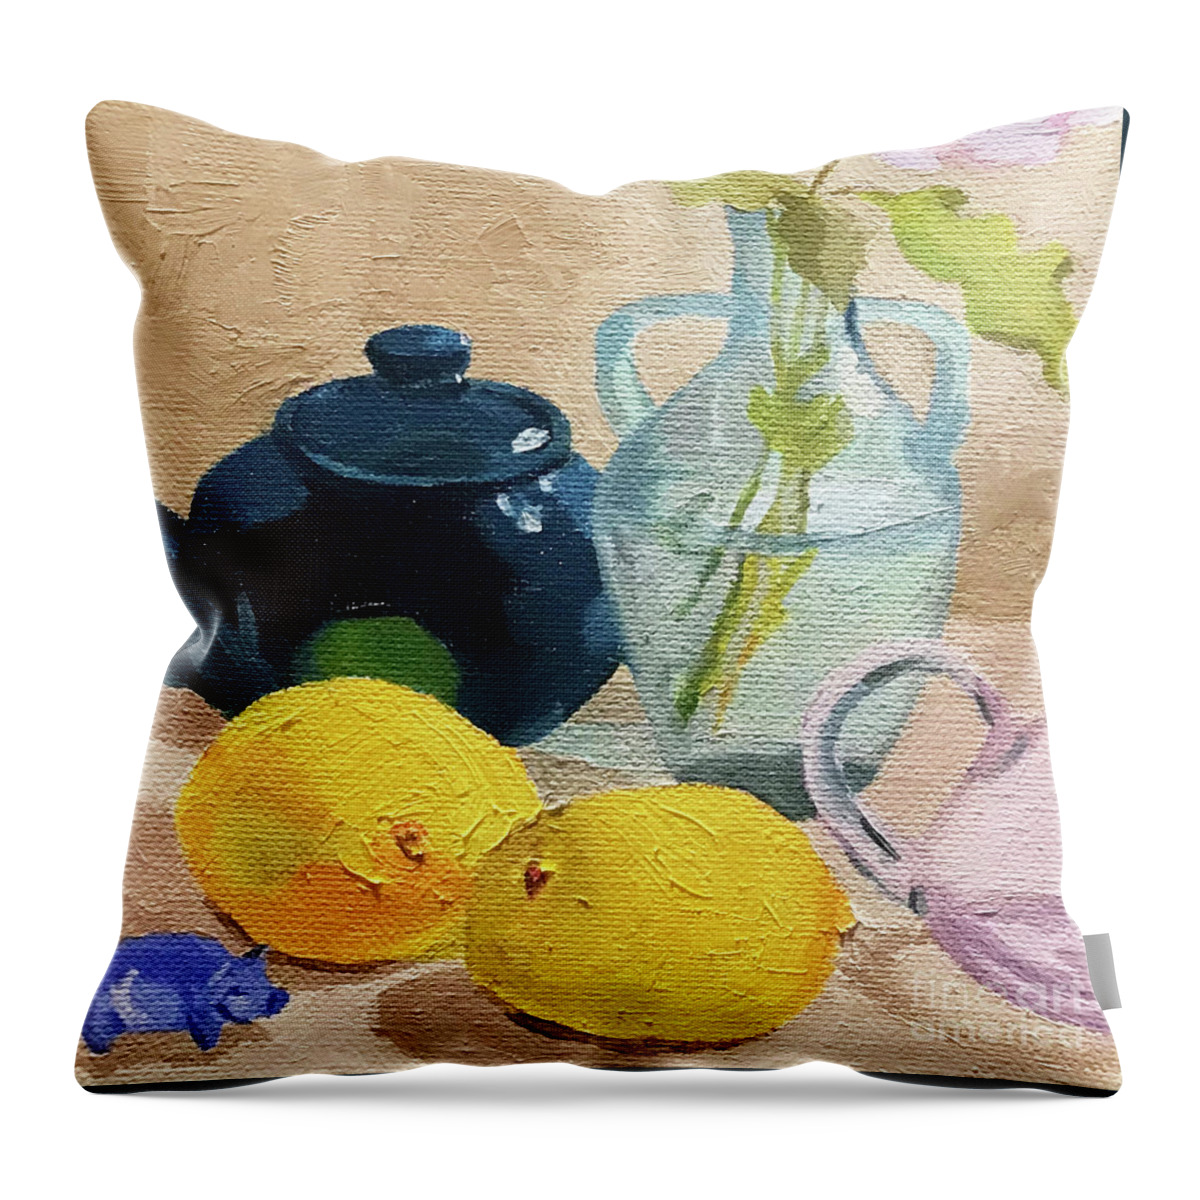 Lemon Throw Pillow featuring the painting Teal Teapot and Lemons by Anne Marie Brown